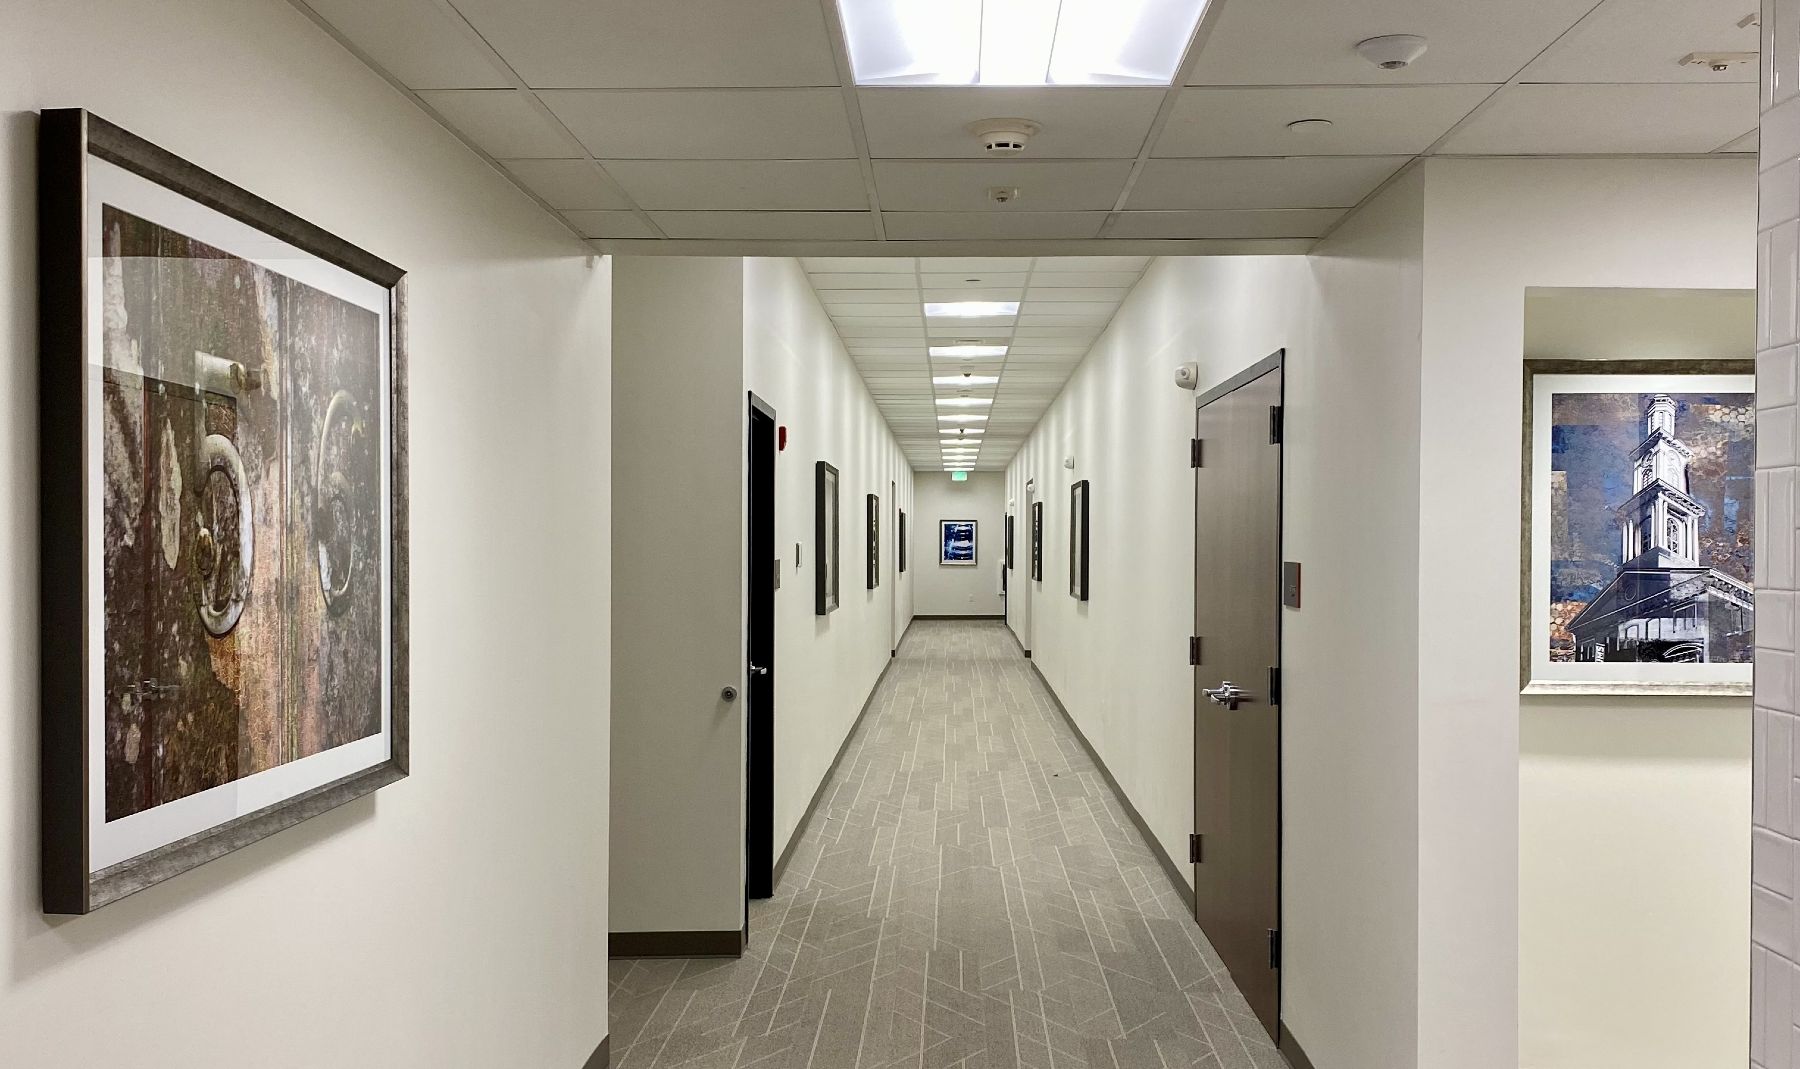 A hallway in a commercial building with several pieces of framed art hung on the wall